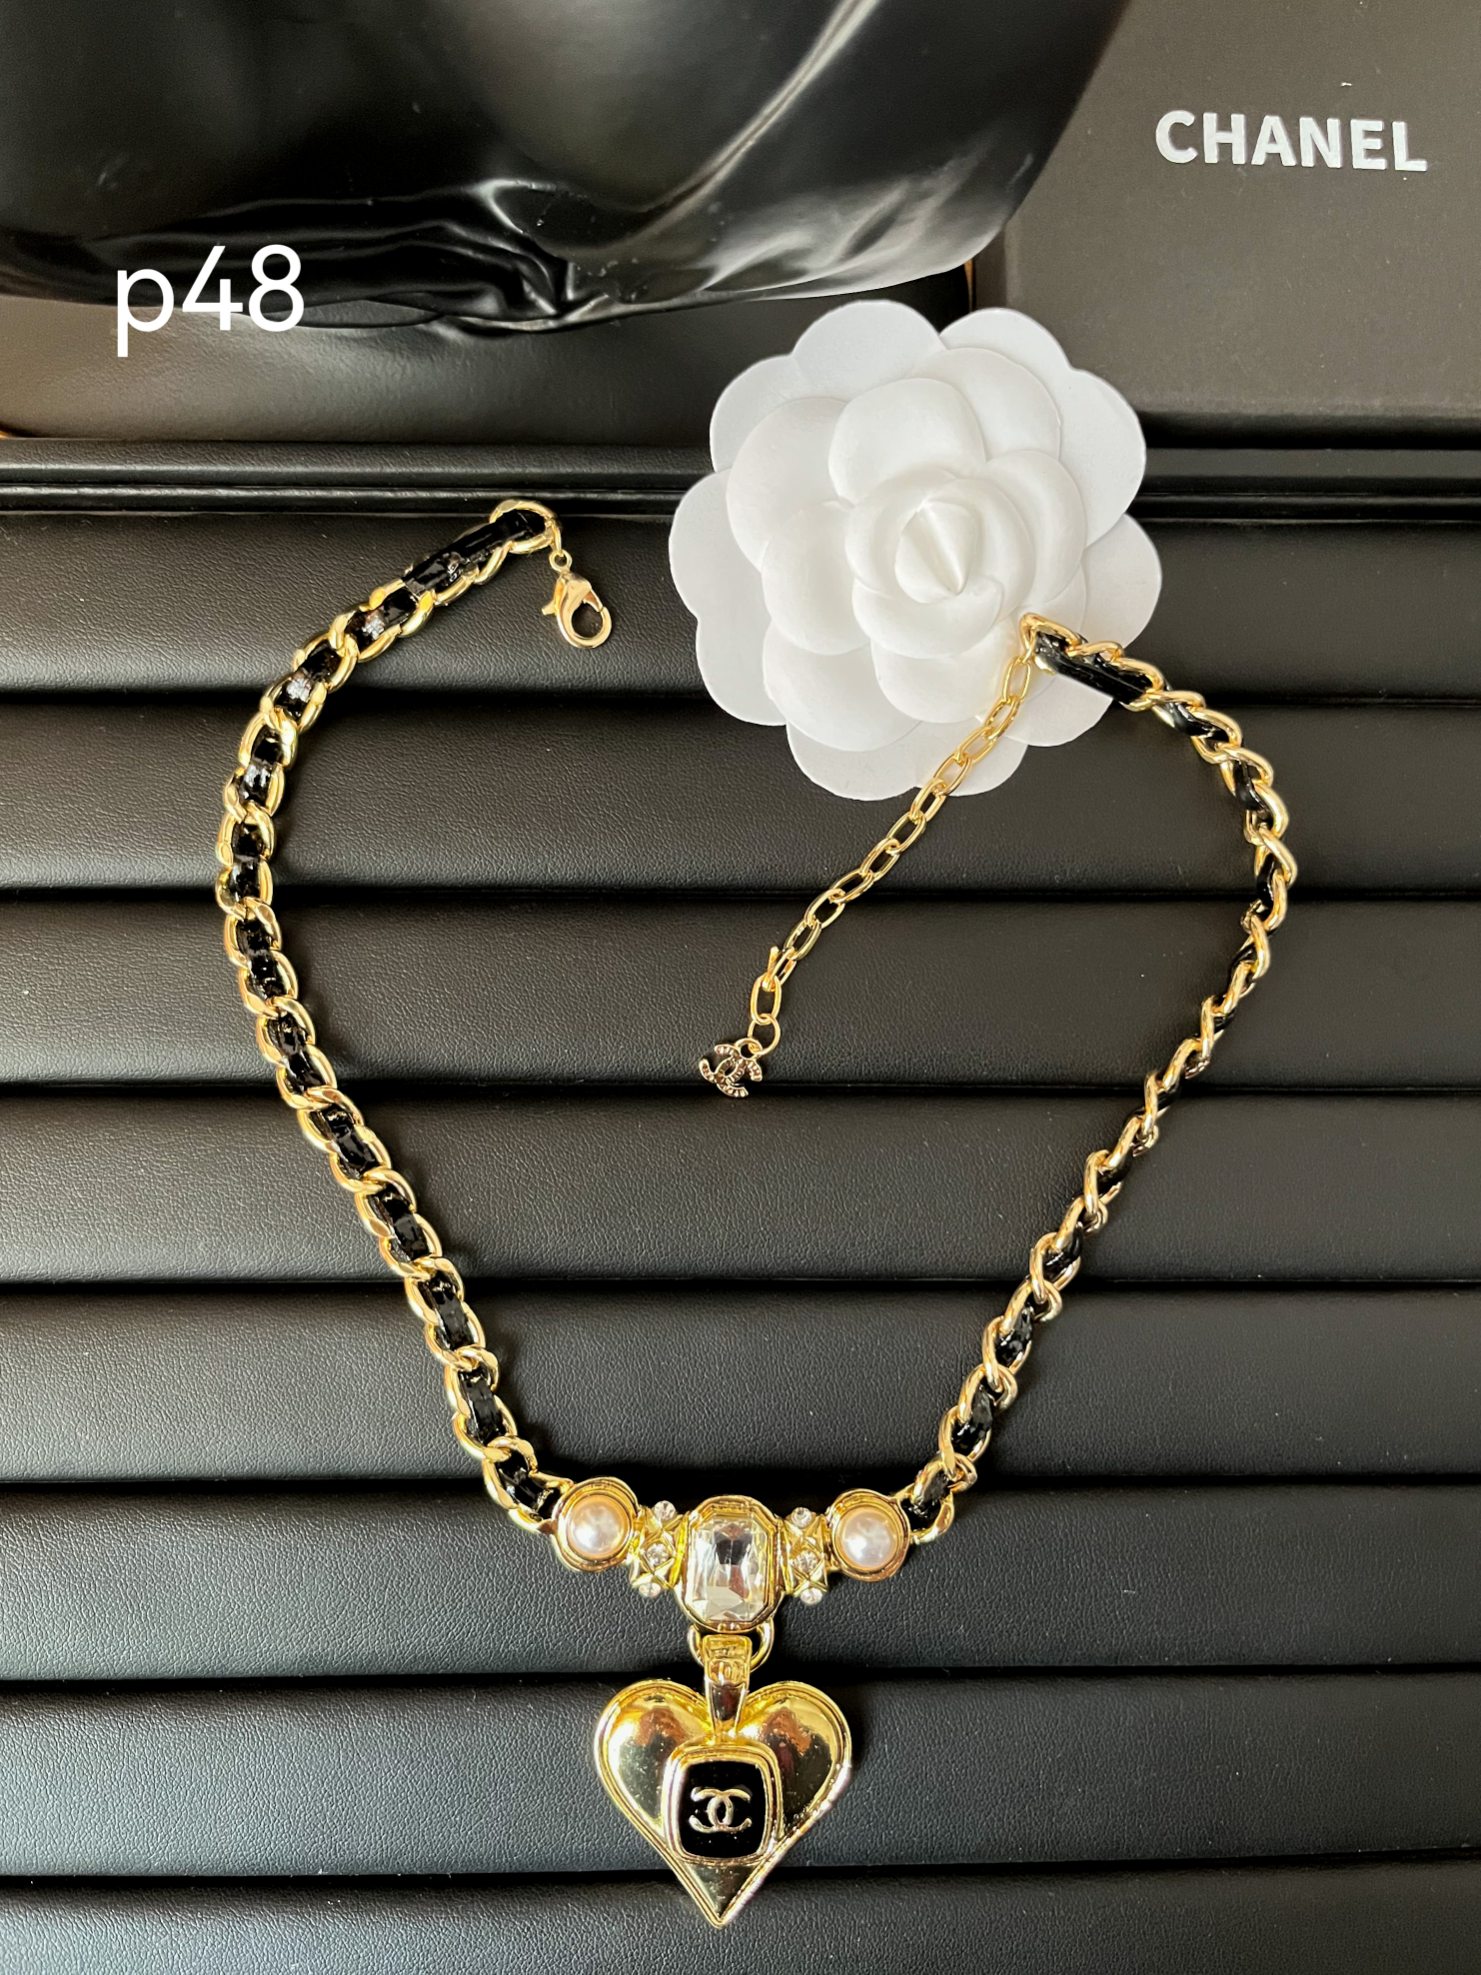 p48 Chanel heart necklace